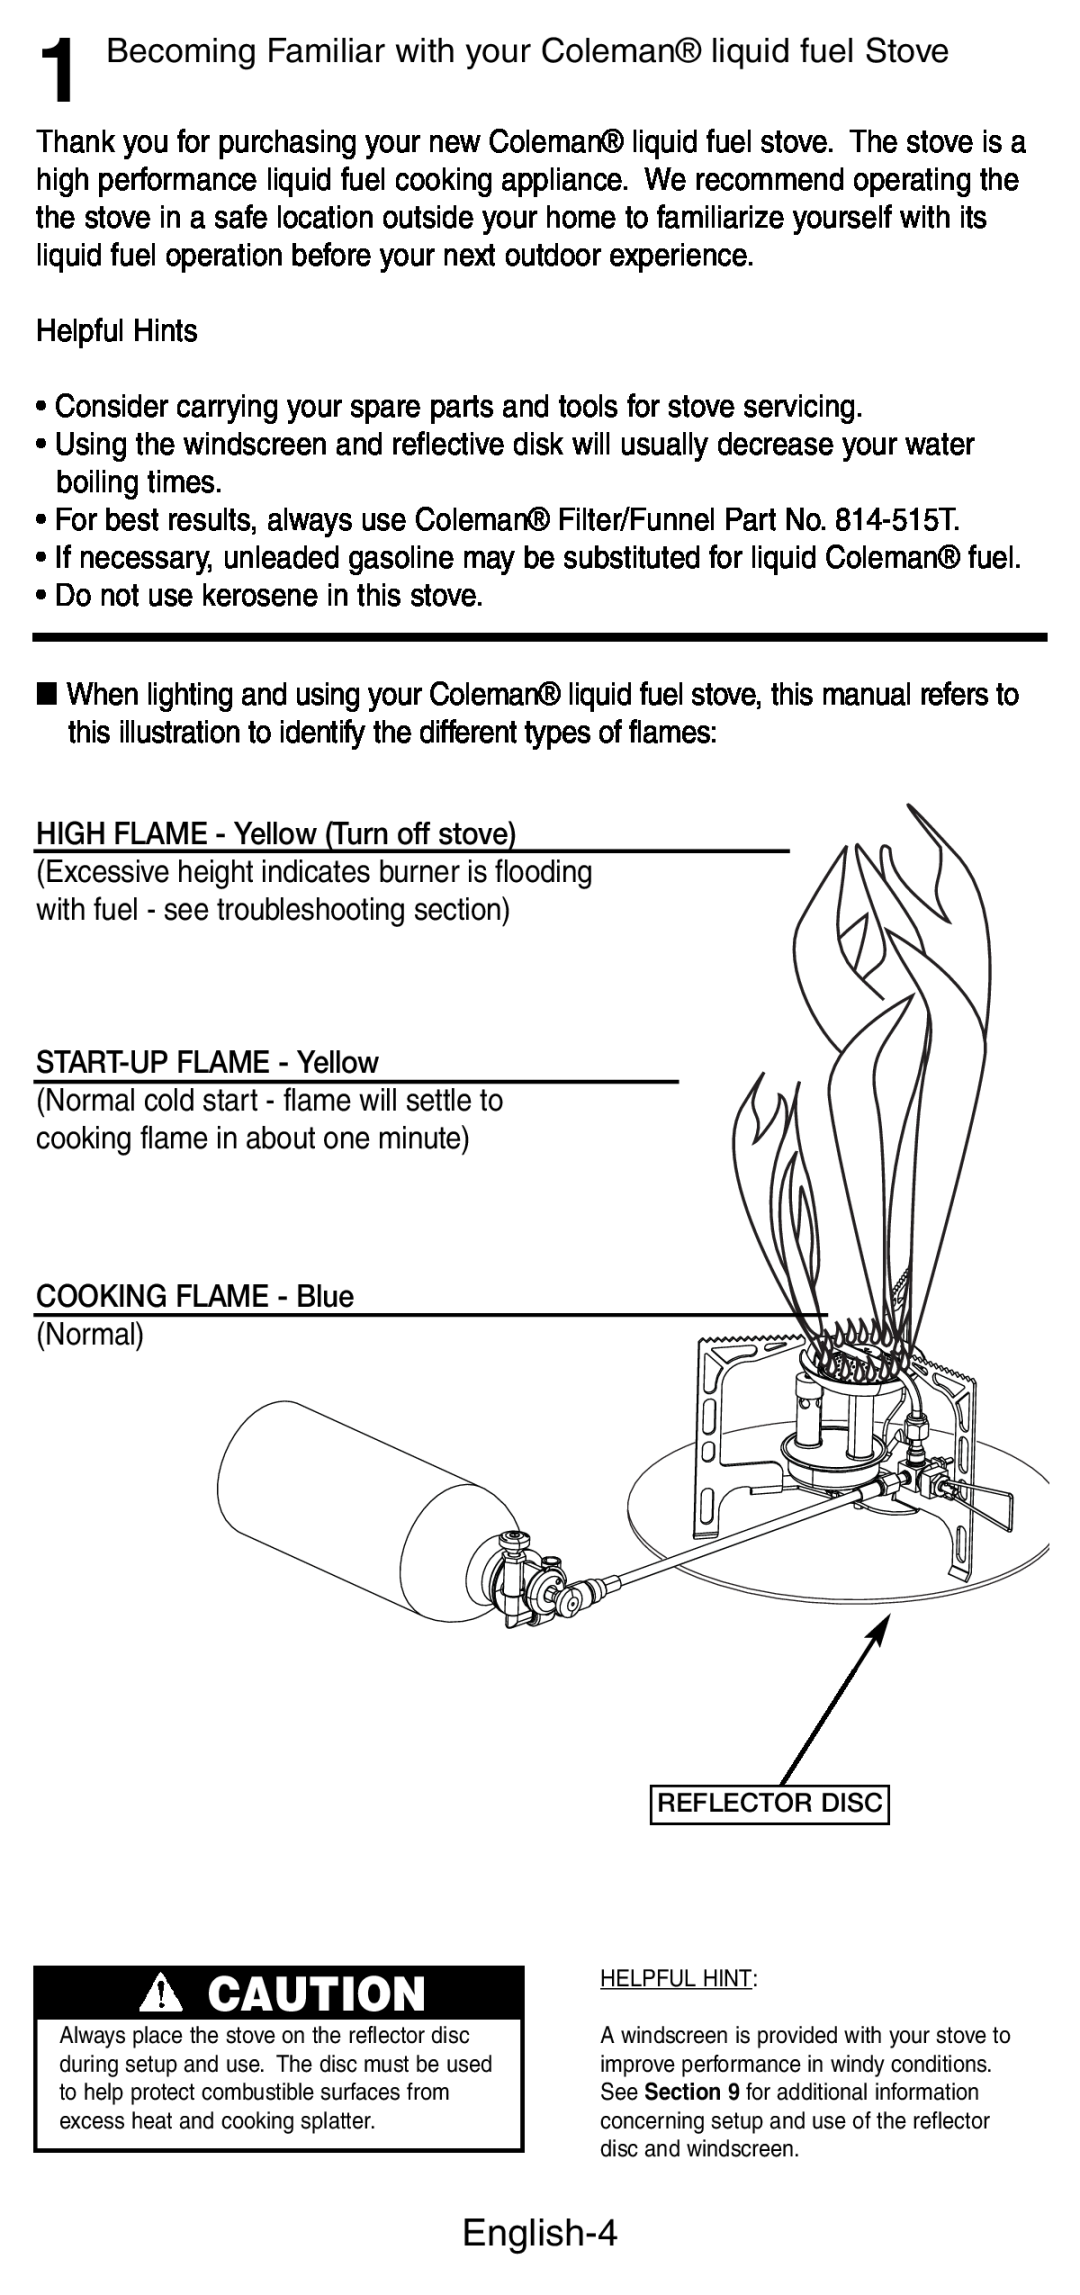 Coleman 9760 manual English-4, Becoming Familiar with your Coleman liquid fuel Stove, HIGH FLAME - Yellow Turn off stove 